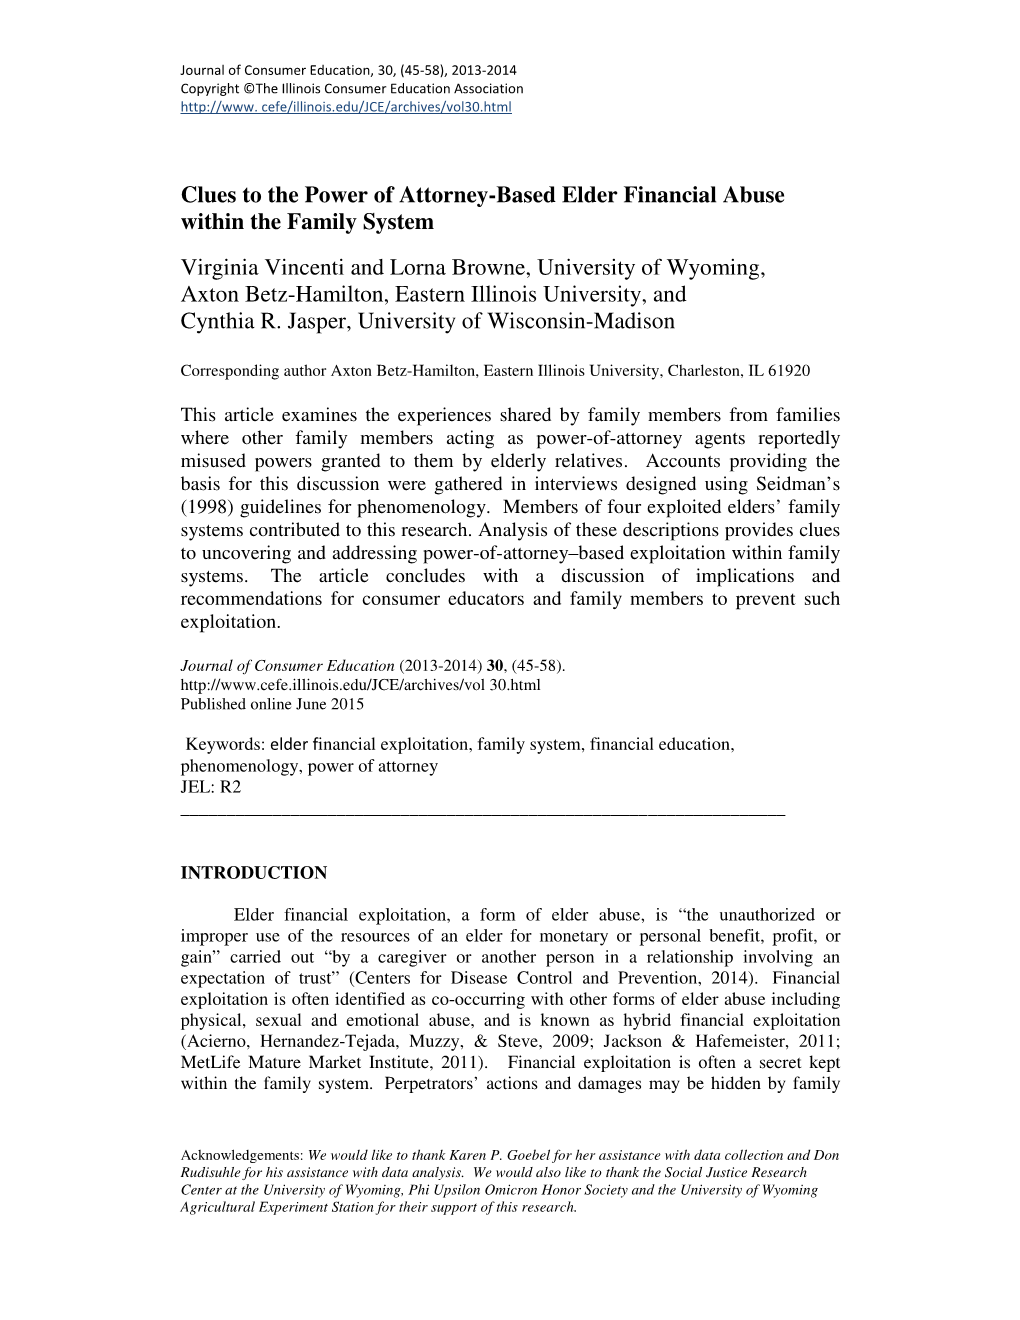 Clues to the Power of Attorney-Based Elder Financial Abuse Within the Family System